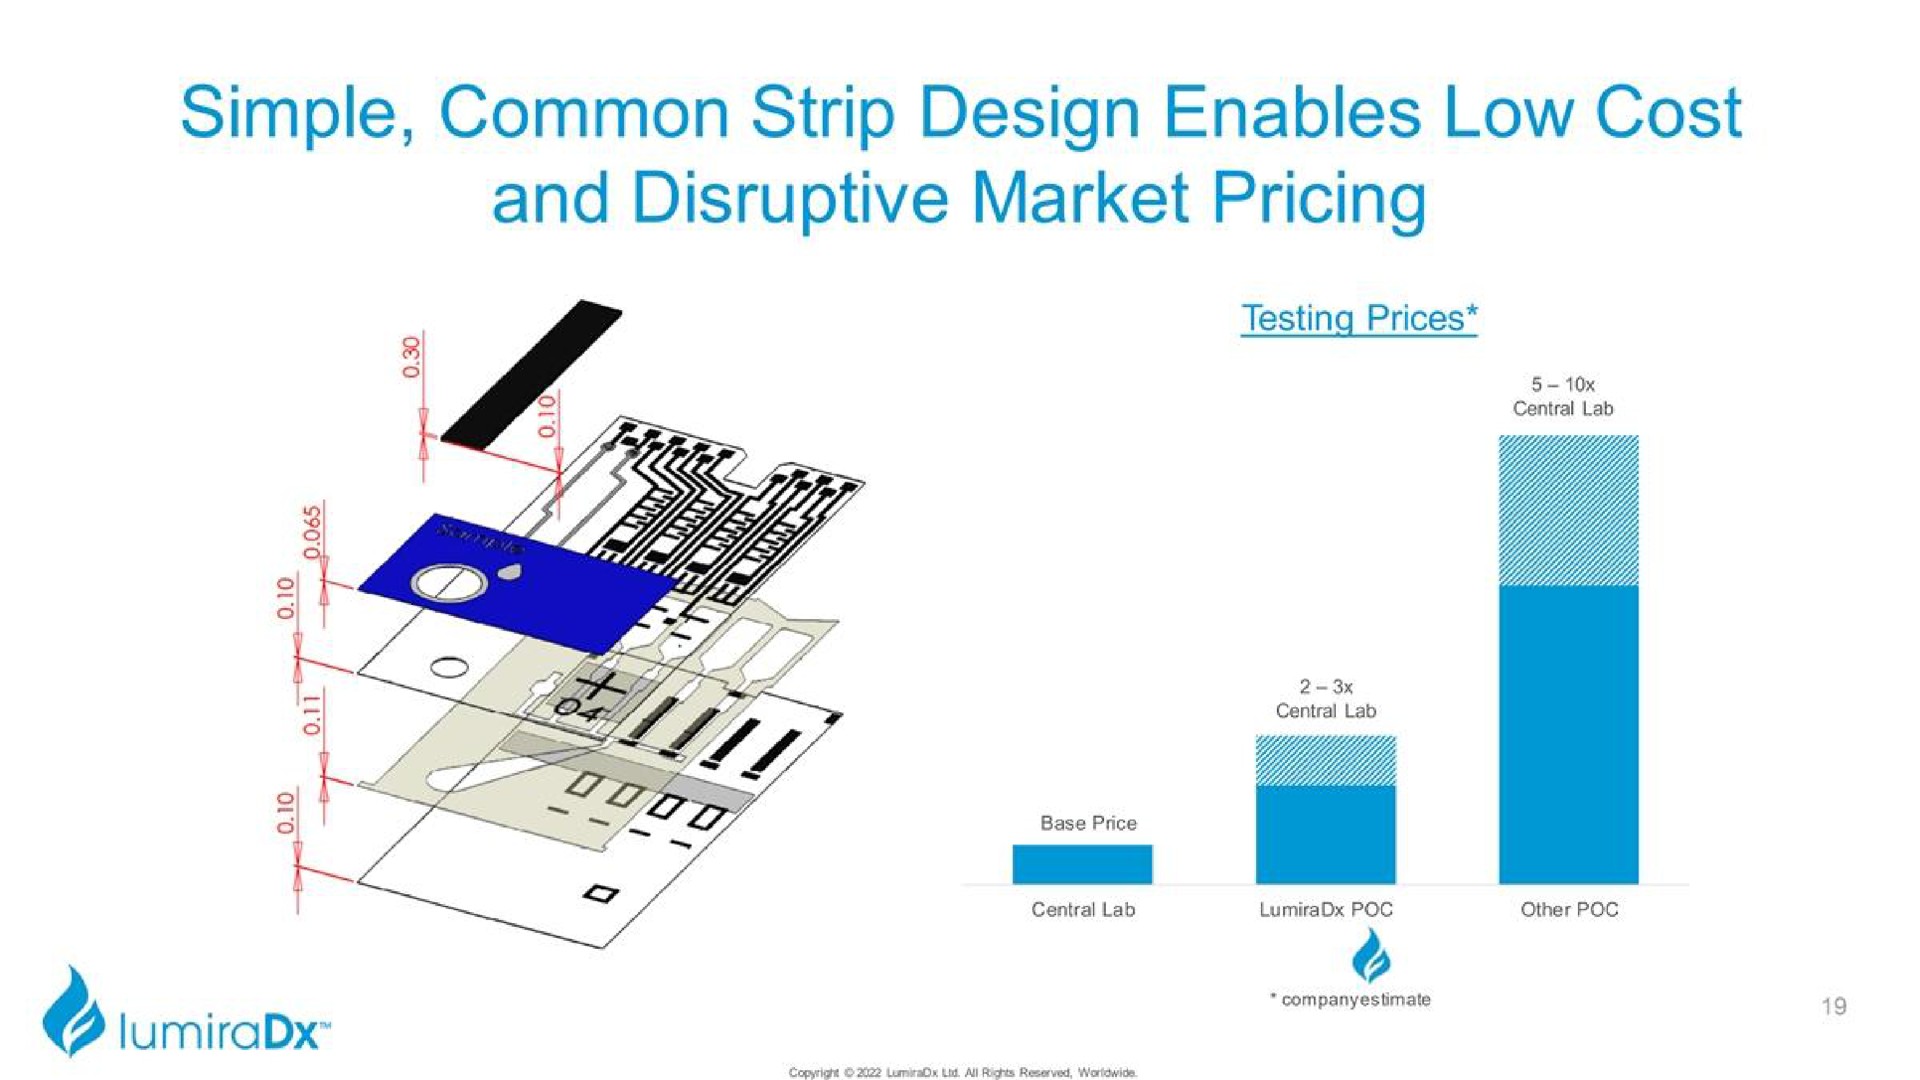 simple common strip design enables low cost and disruptive market pricing | LumiraDx